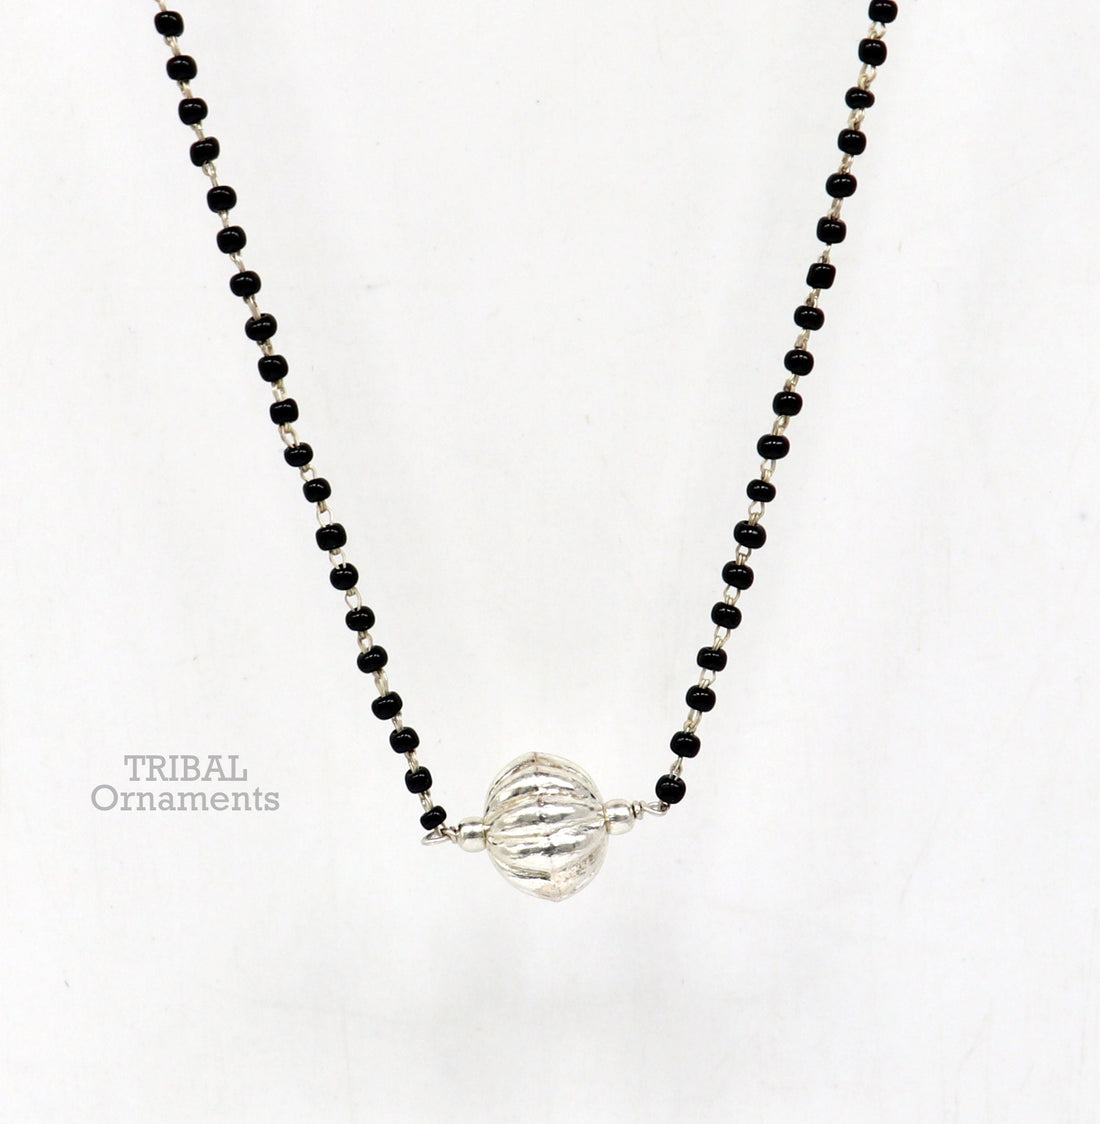 Pure 925 sterling silver black beads chain necklace, vintage ball pendant, traditional style brides Mangalsutra necklace set444 - TRIBAL ORNAMENTS